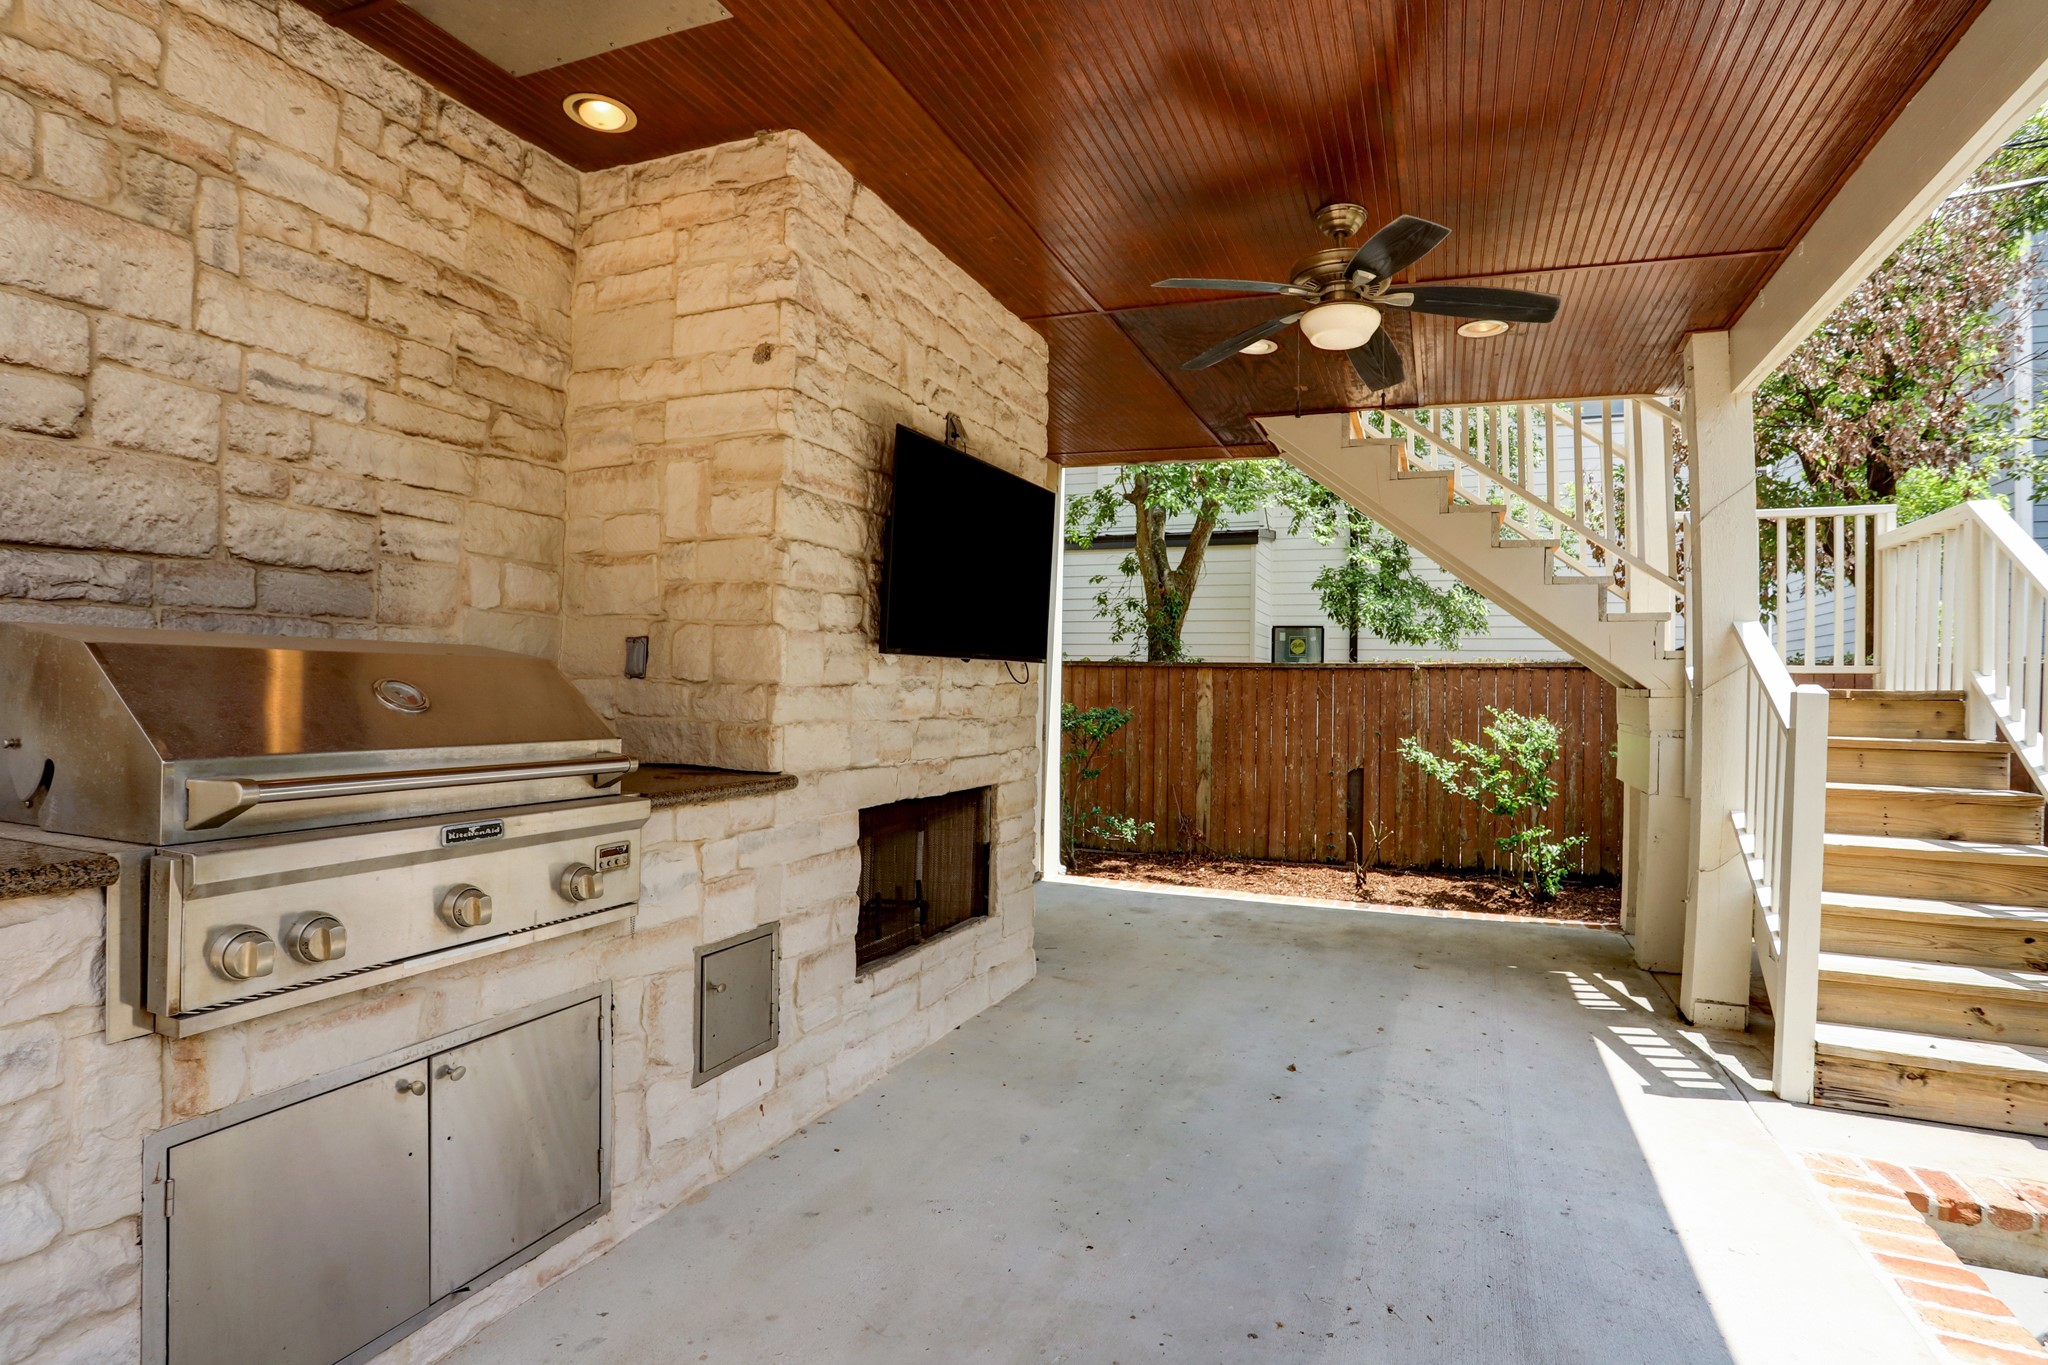 Perfect area for entertaining with a built-in gas grill, mounted tv and fireplace.